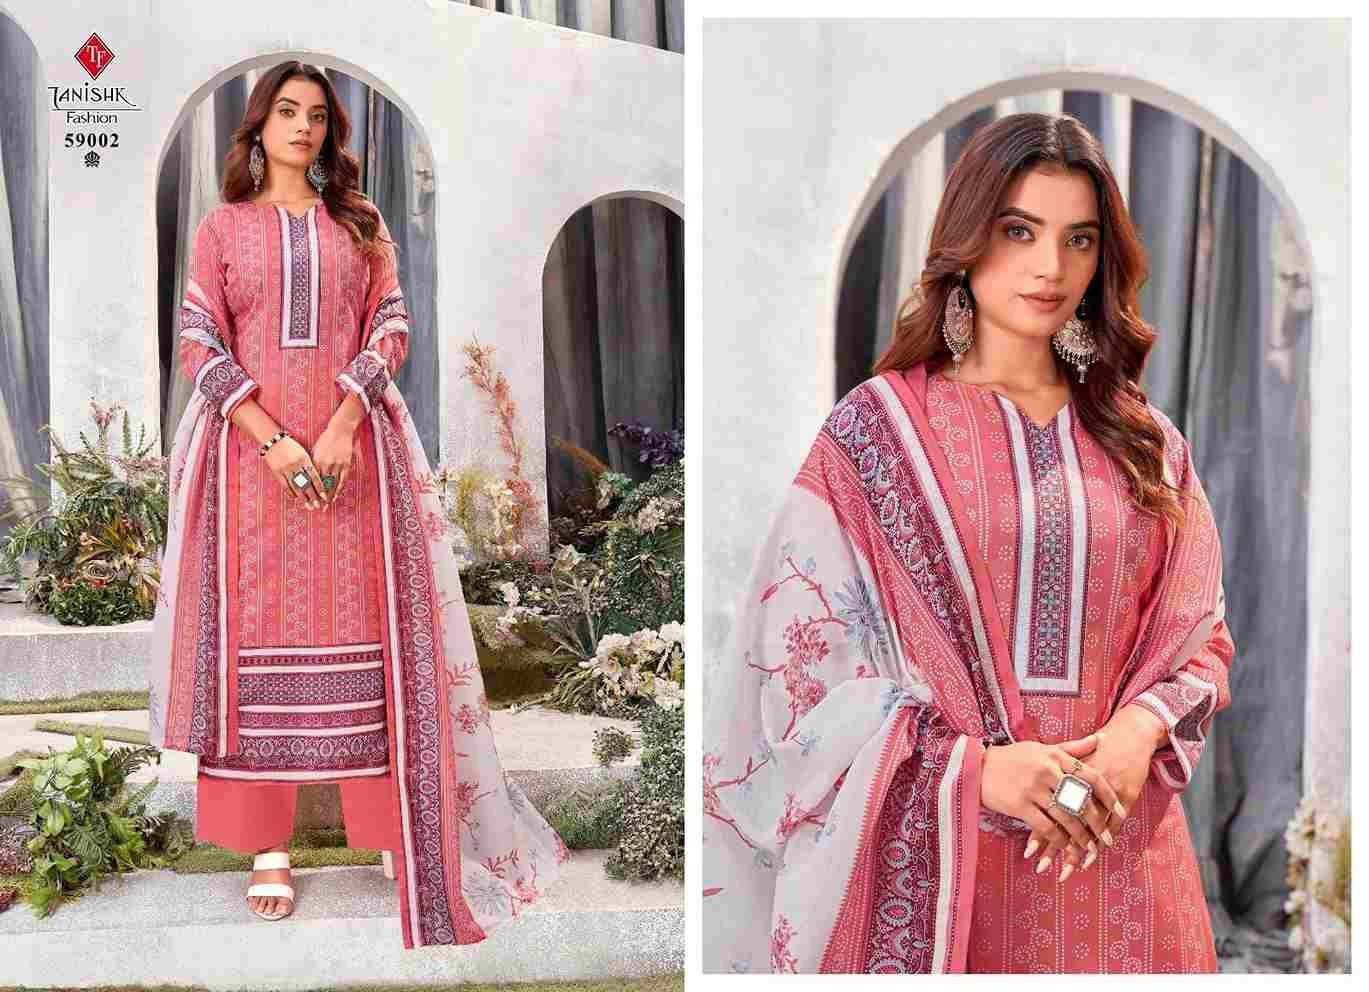 Gazal By Tanishk Fashion 59001 To 59008 Series Beautiful Festive Suits Colorful Stylish Fancy Casual Wear & Ethnic Wear Semi Lawn Cotton Print Dresses At Wholesale Price